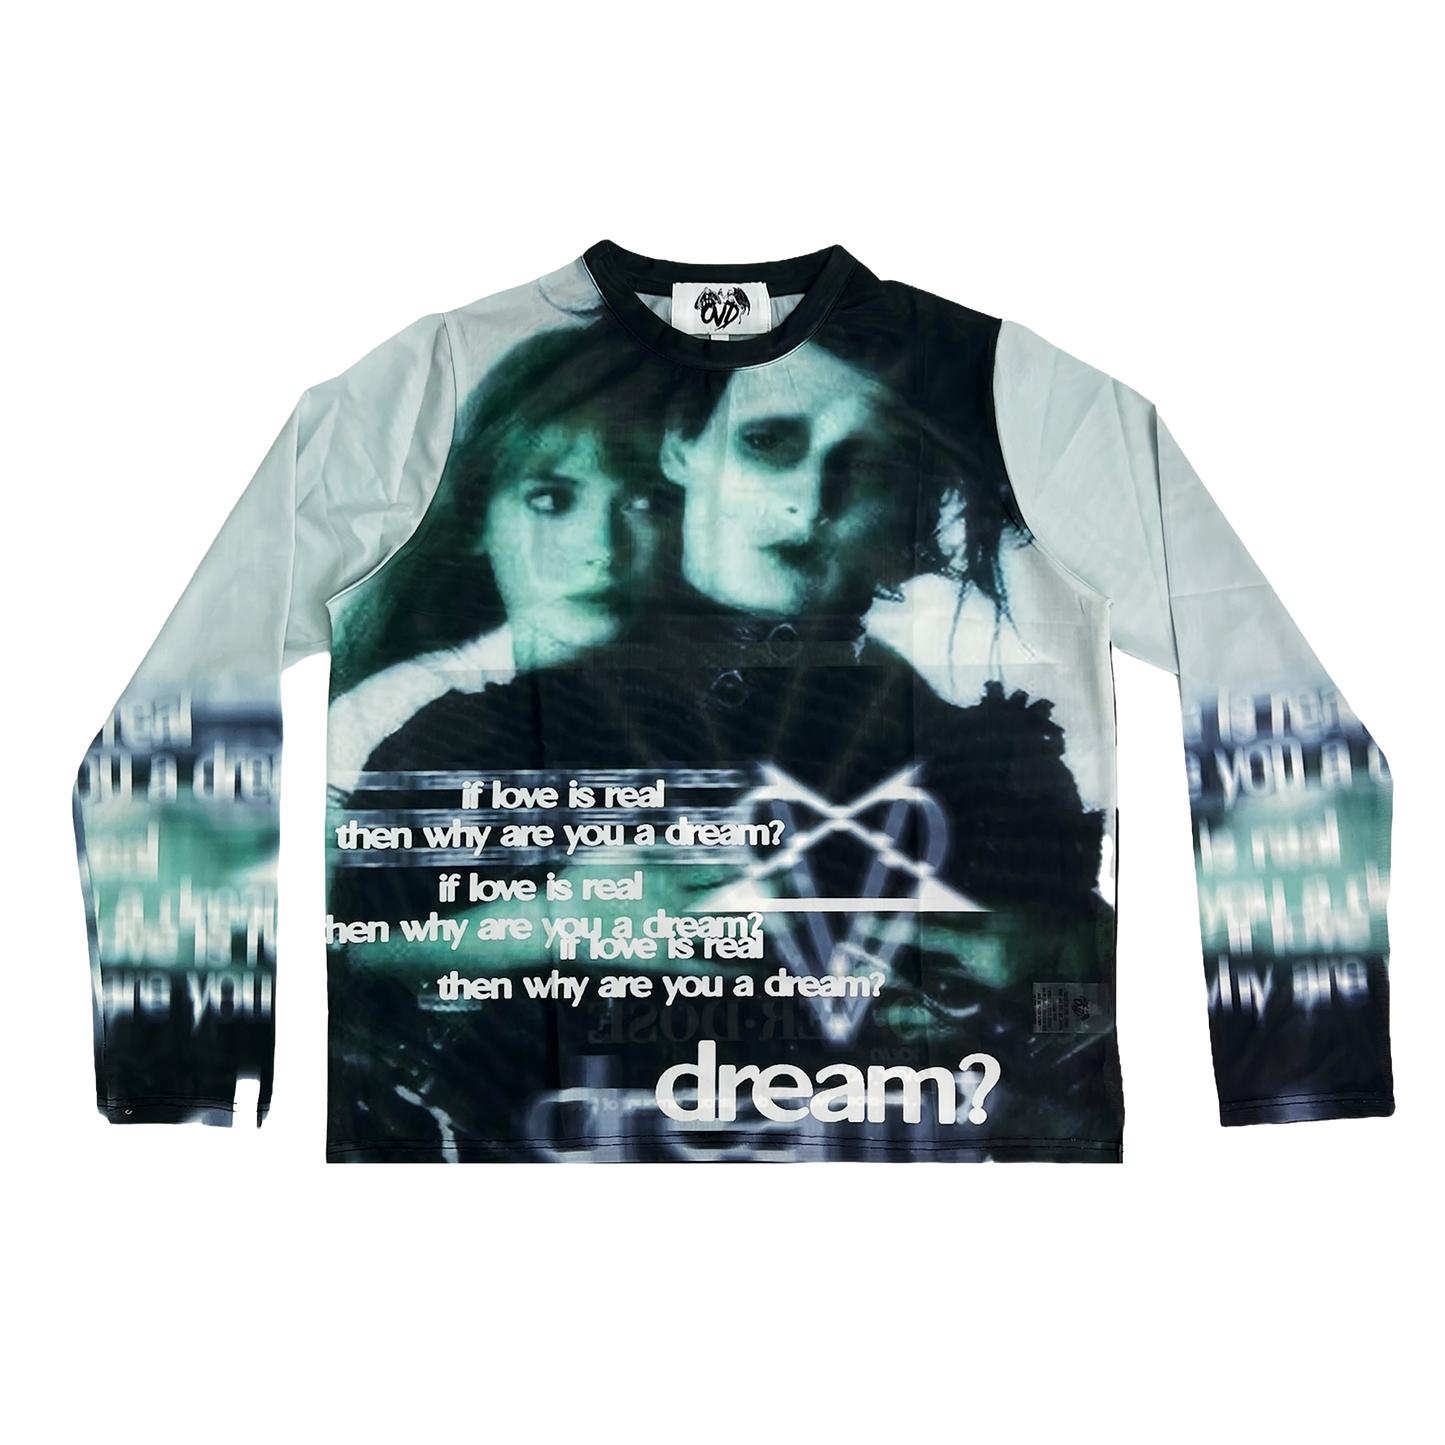 "IF LOVE IS REAL, THEN WHY ARE YOU A DREAM?" MESH L/S